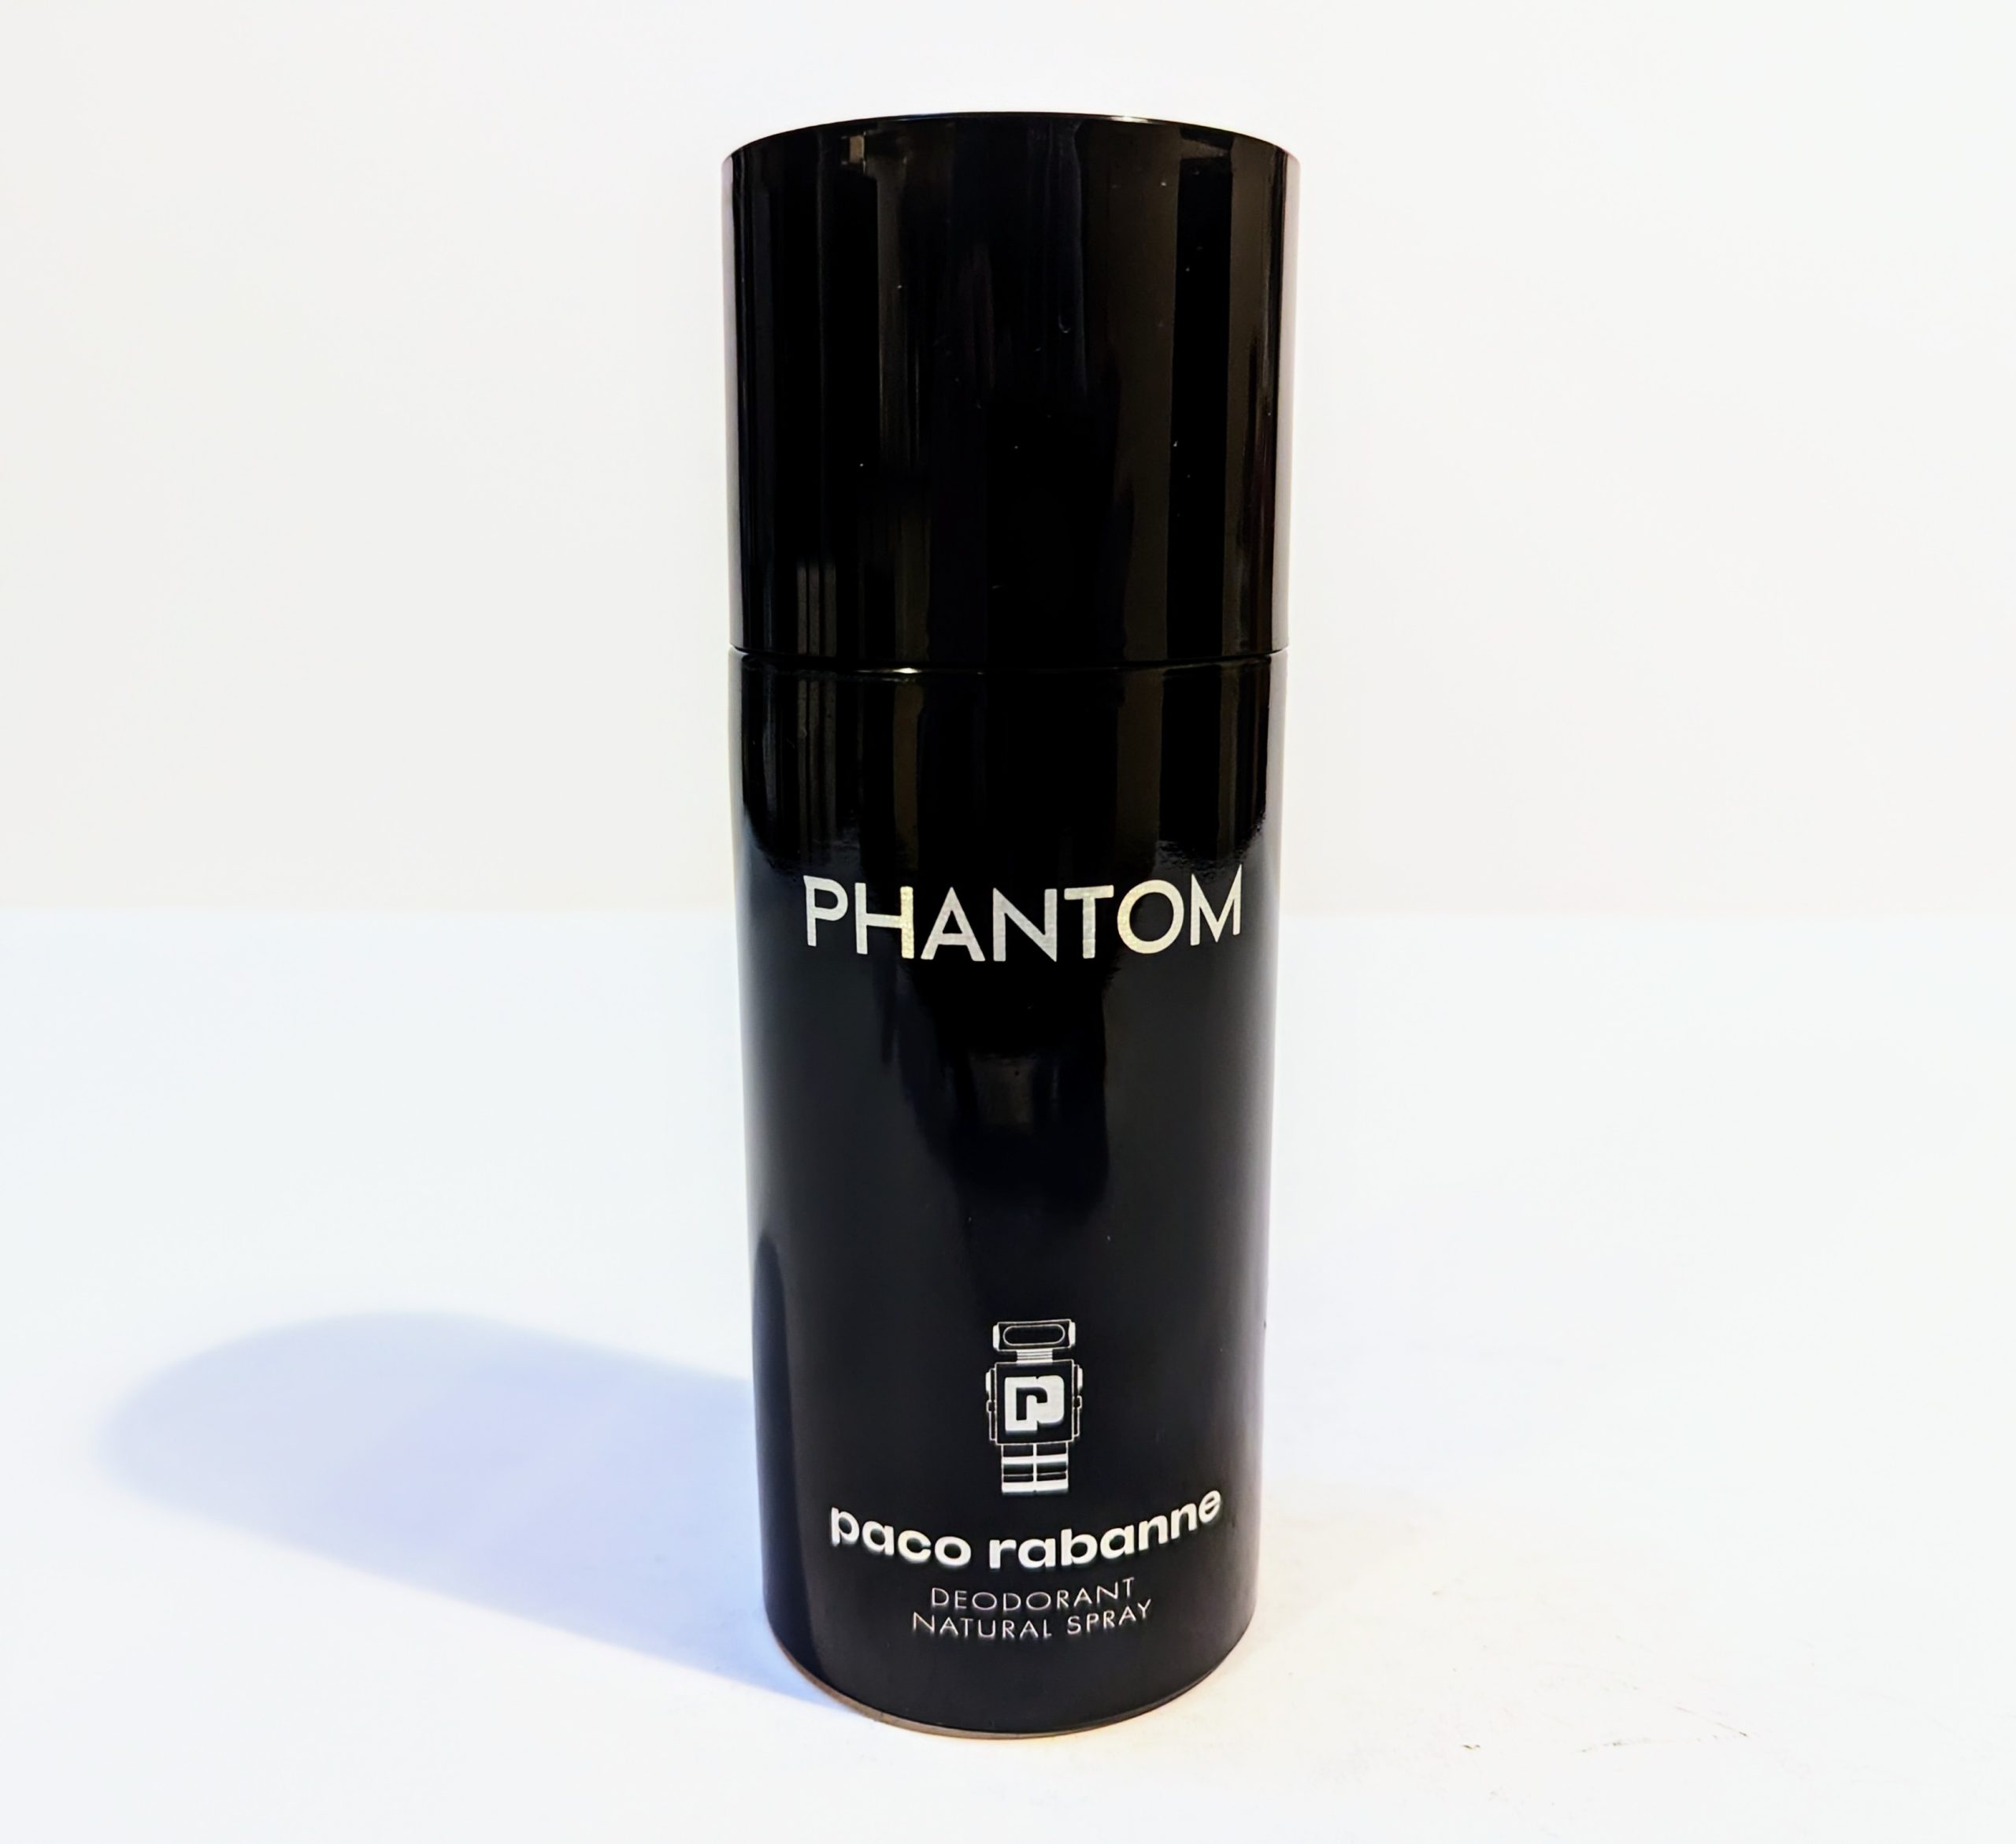 A black cylindrical bottle labeled “PHANTOM” with “paco rabanne” and “DEODORANT NATURAL SPRAY” written below in white text.